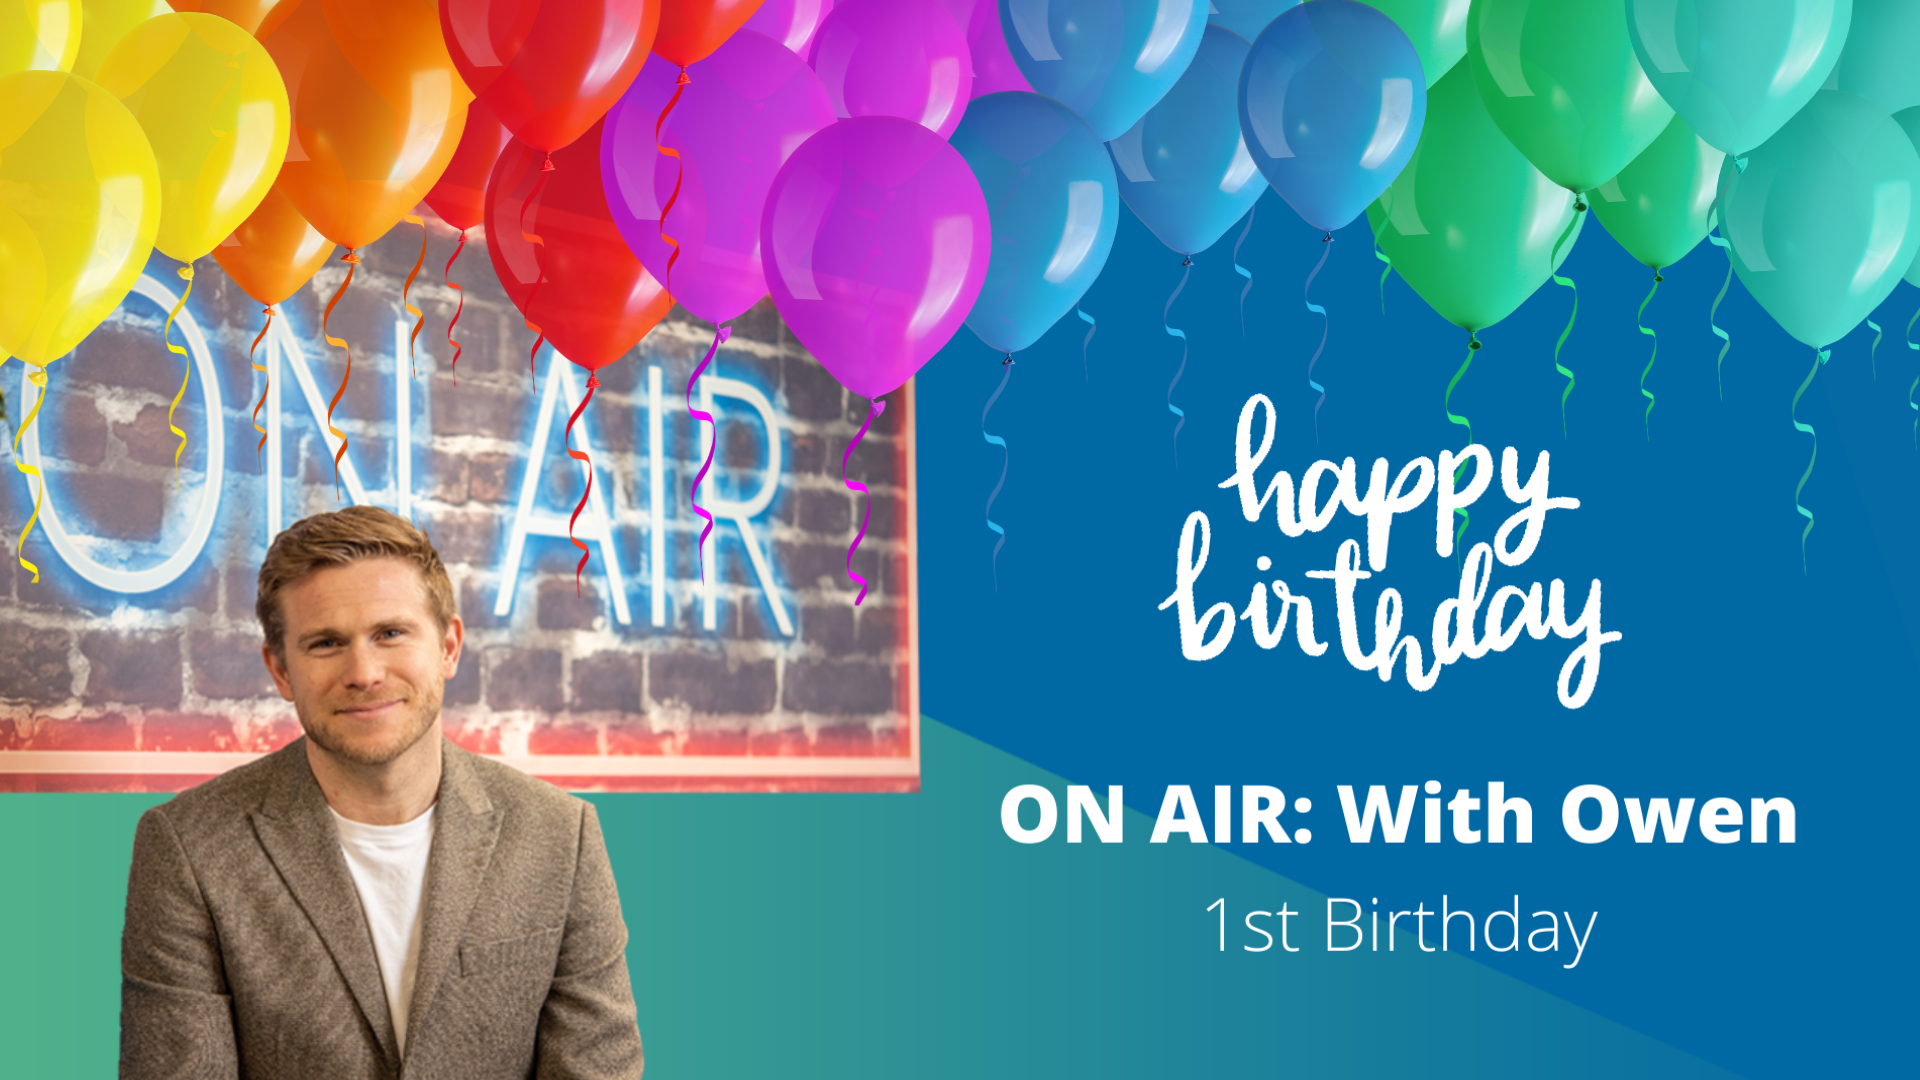 ON AIR: With Owen 1st Birthday